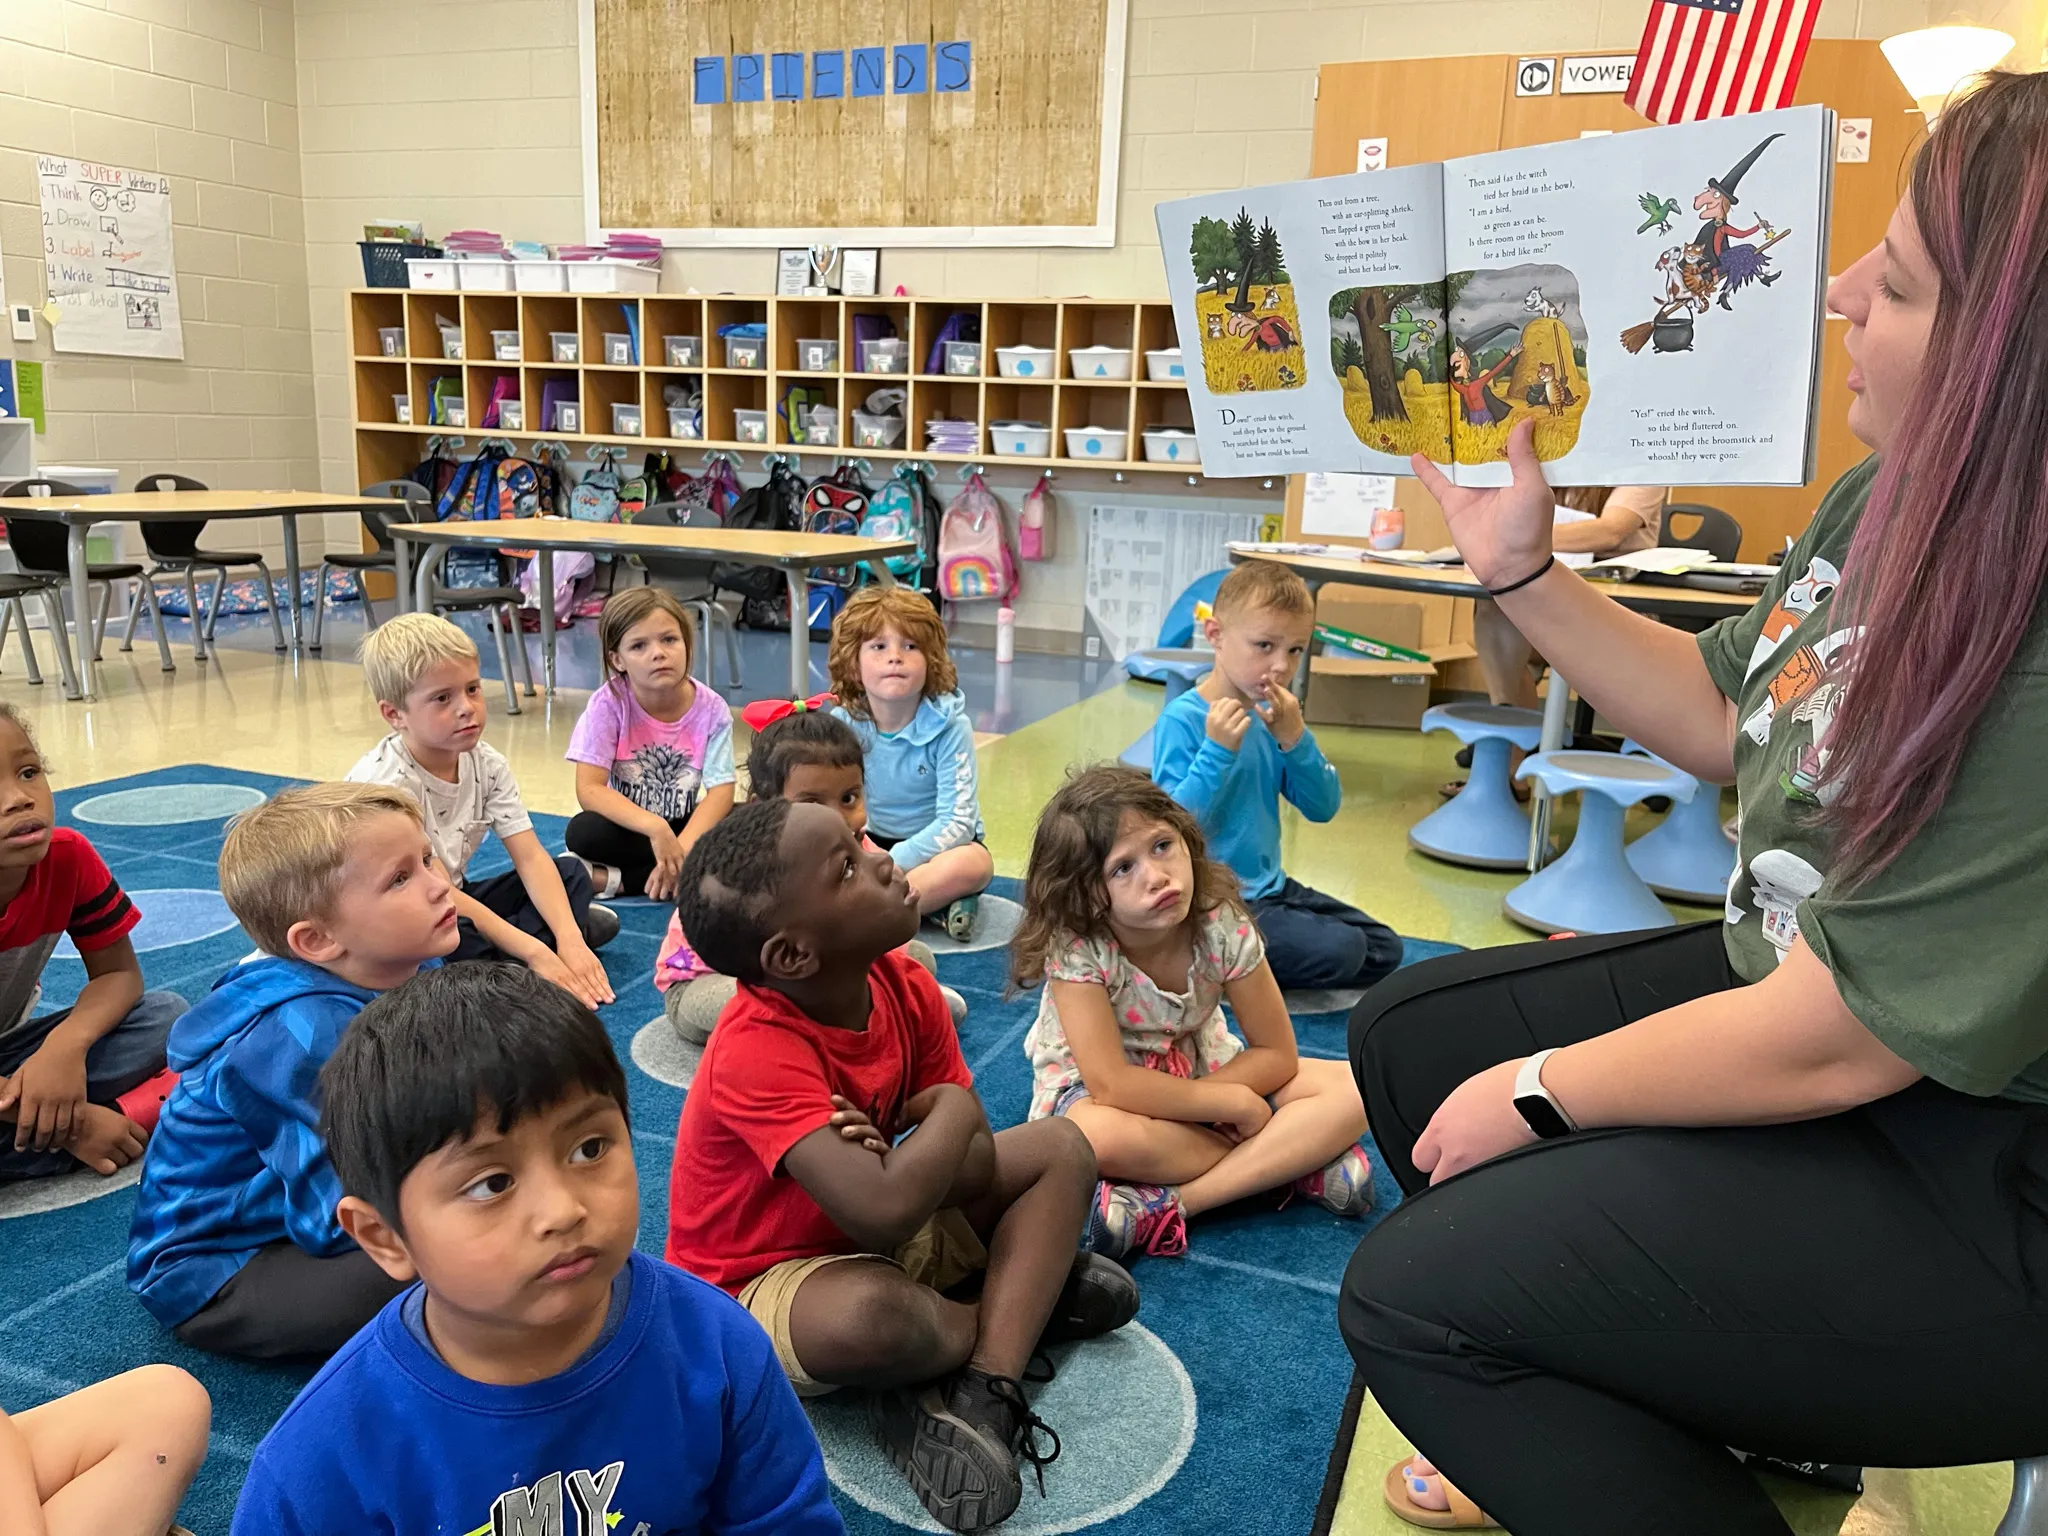 Library staff member reading book to group of kids at Gilbert elementary school